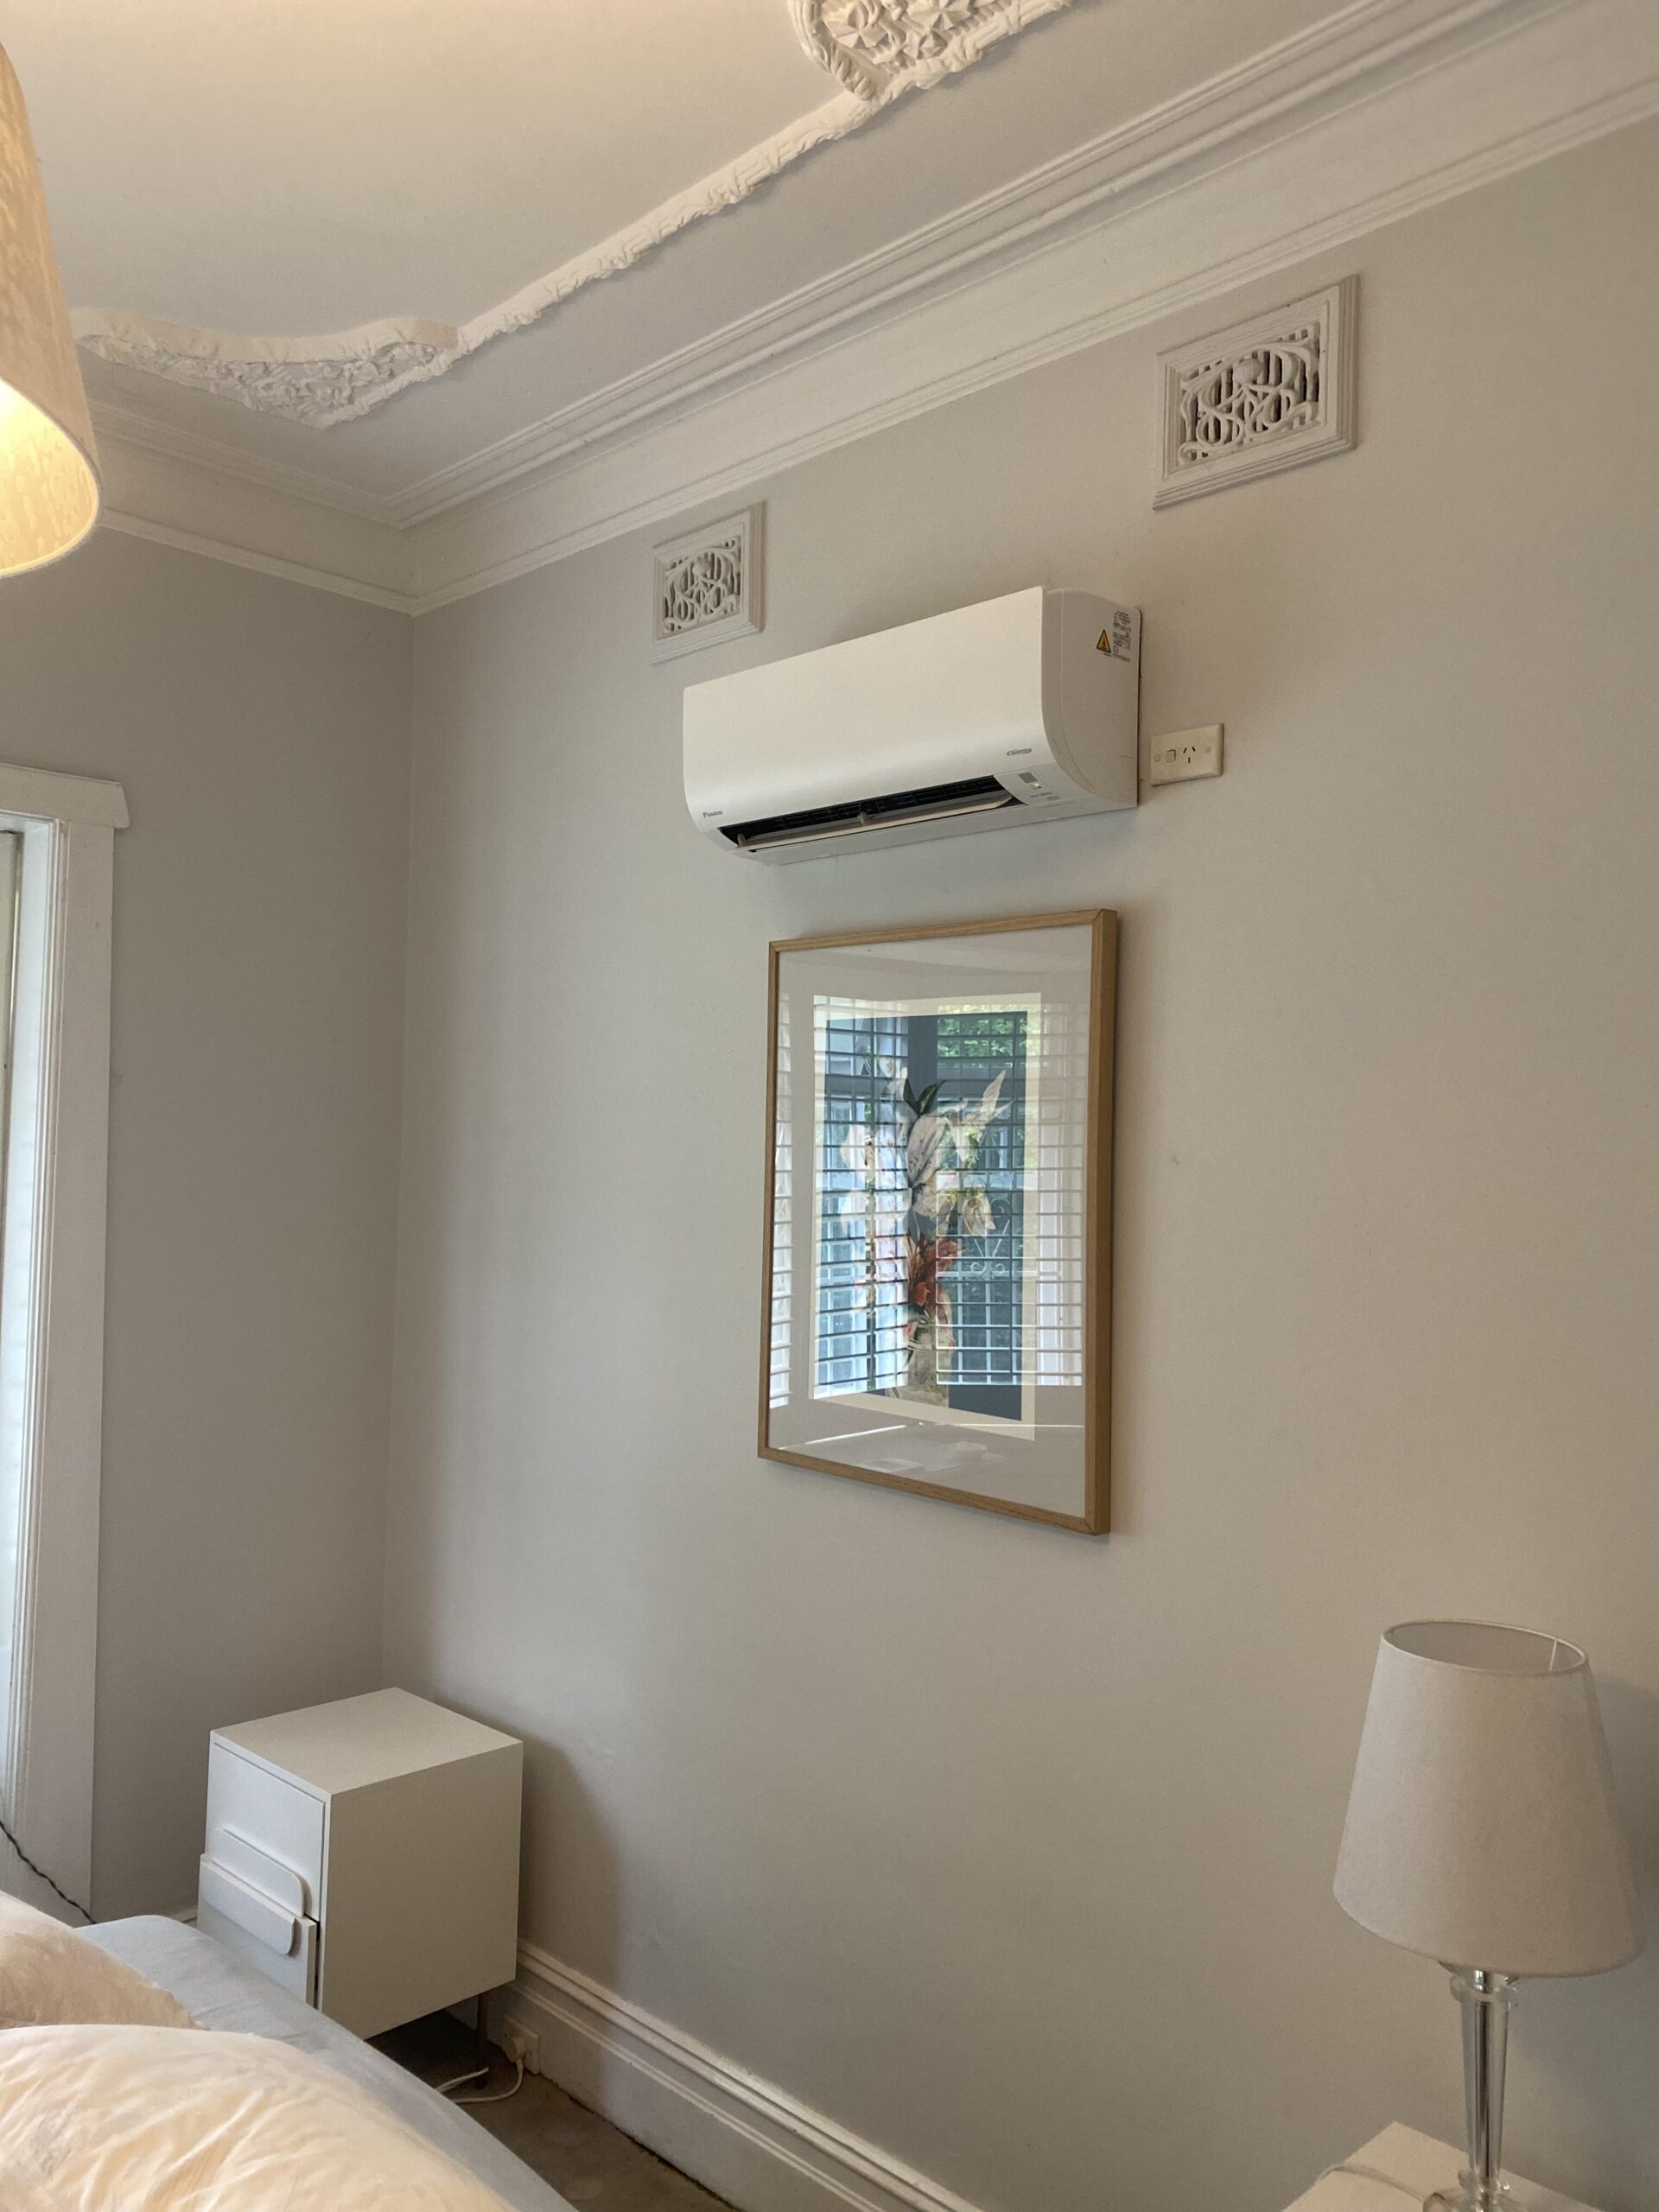 Project – Daikin split system replacement at Cremorne area.